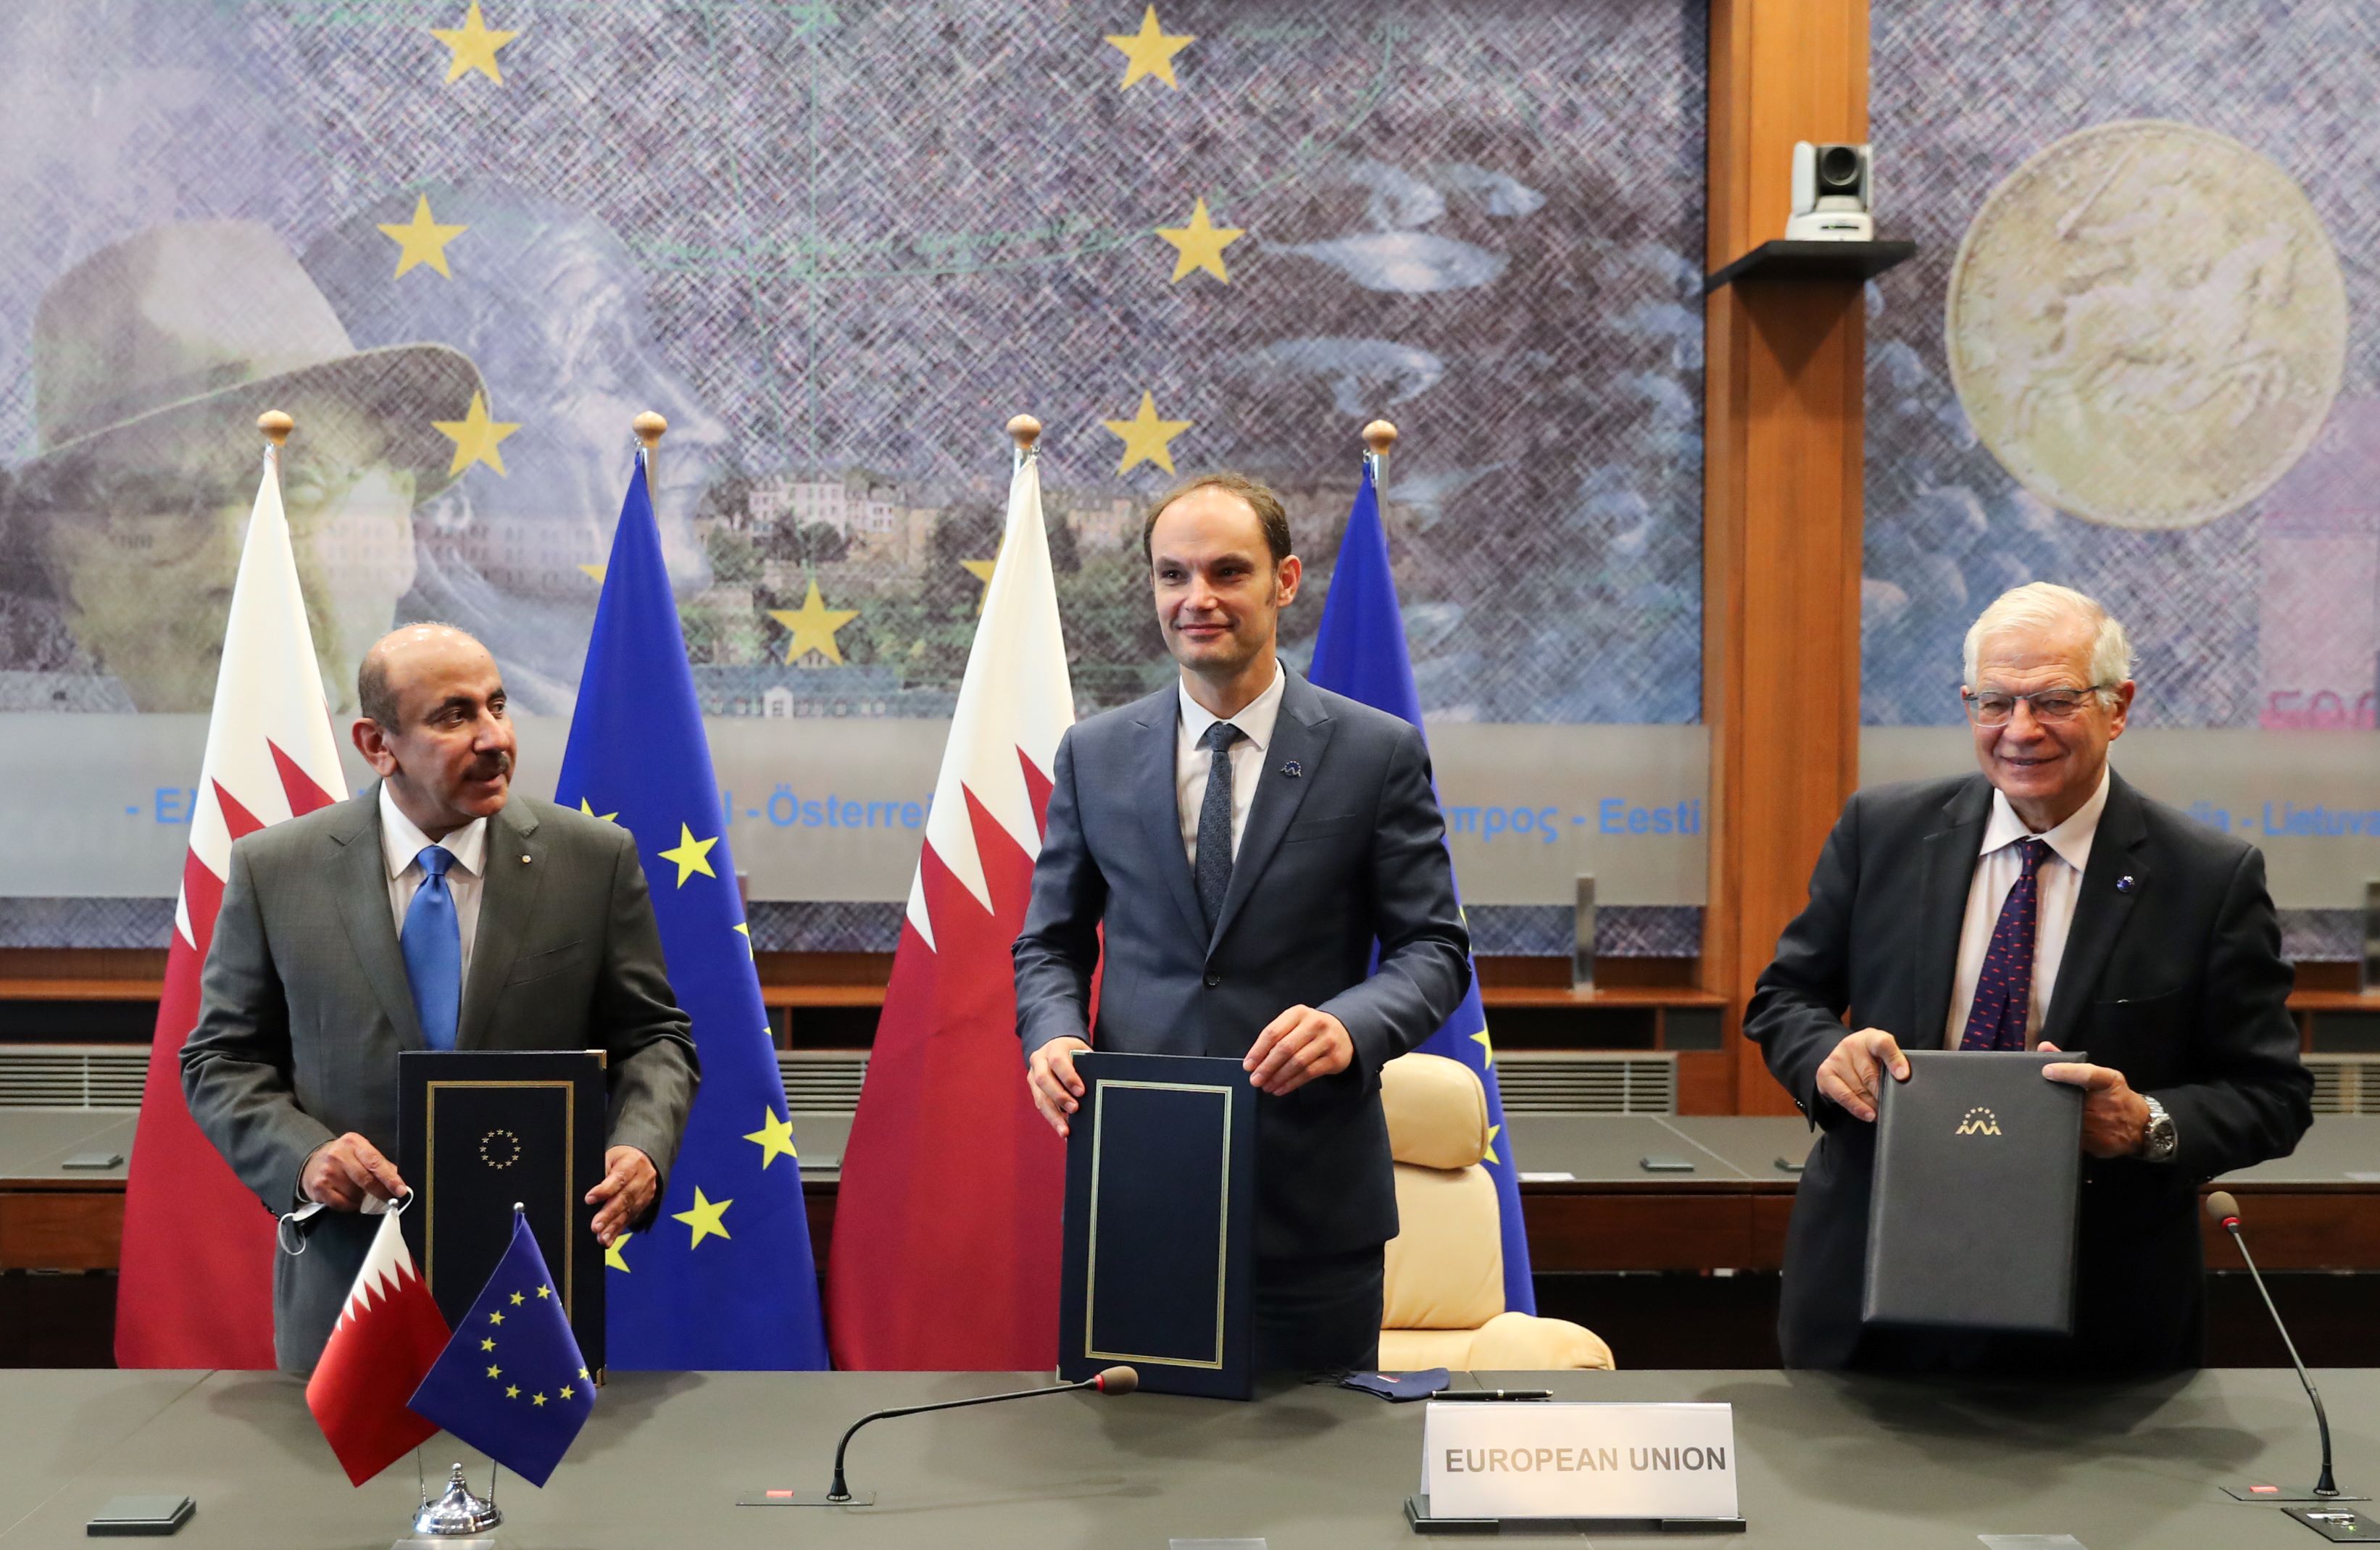 Qatari Minister of Transport ,Slovenian Minister for Foreign Affairs and EU High Representative at the signing ceremony